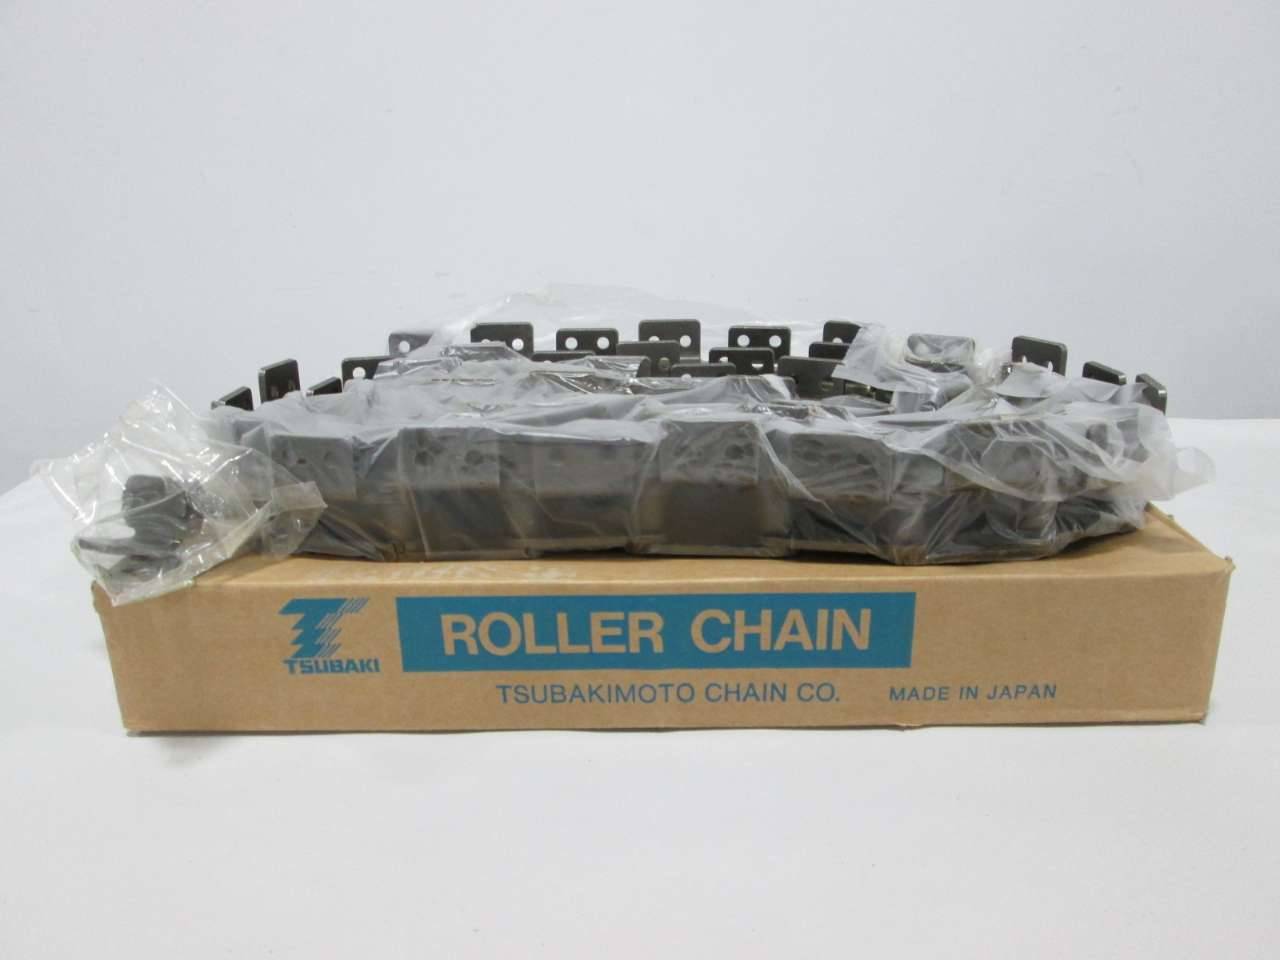 ANSI Chain Size: C2080H EA 1 Tsubaki SA-2 Attachment Roller Chain Link Pack of 2 C2080HSA2RL Carbon Steel 